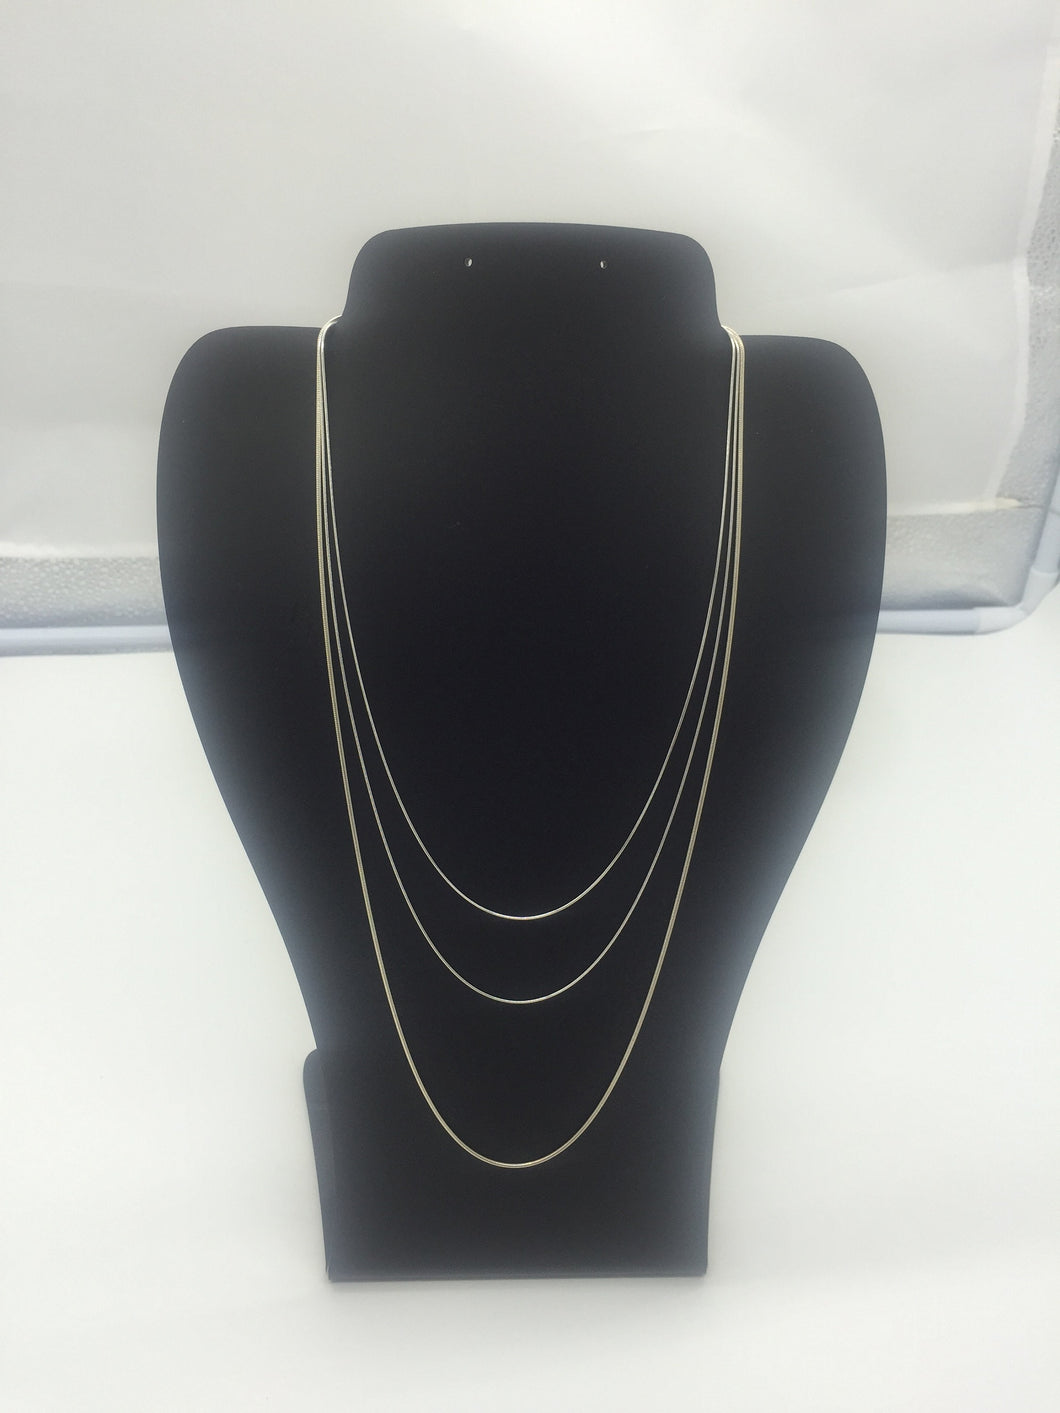 Snake chain,sterling silver chain,925 silver chain,silver snake chain